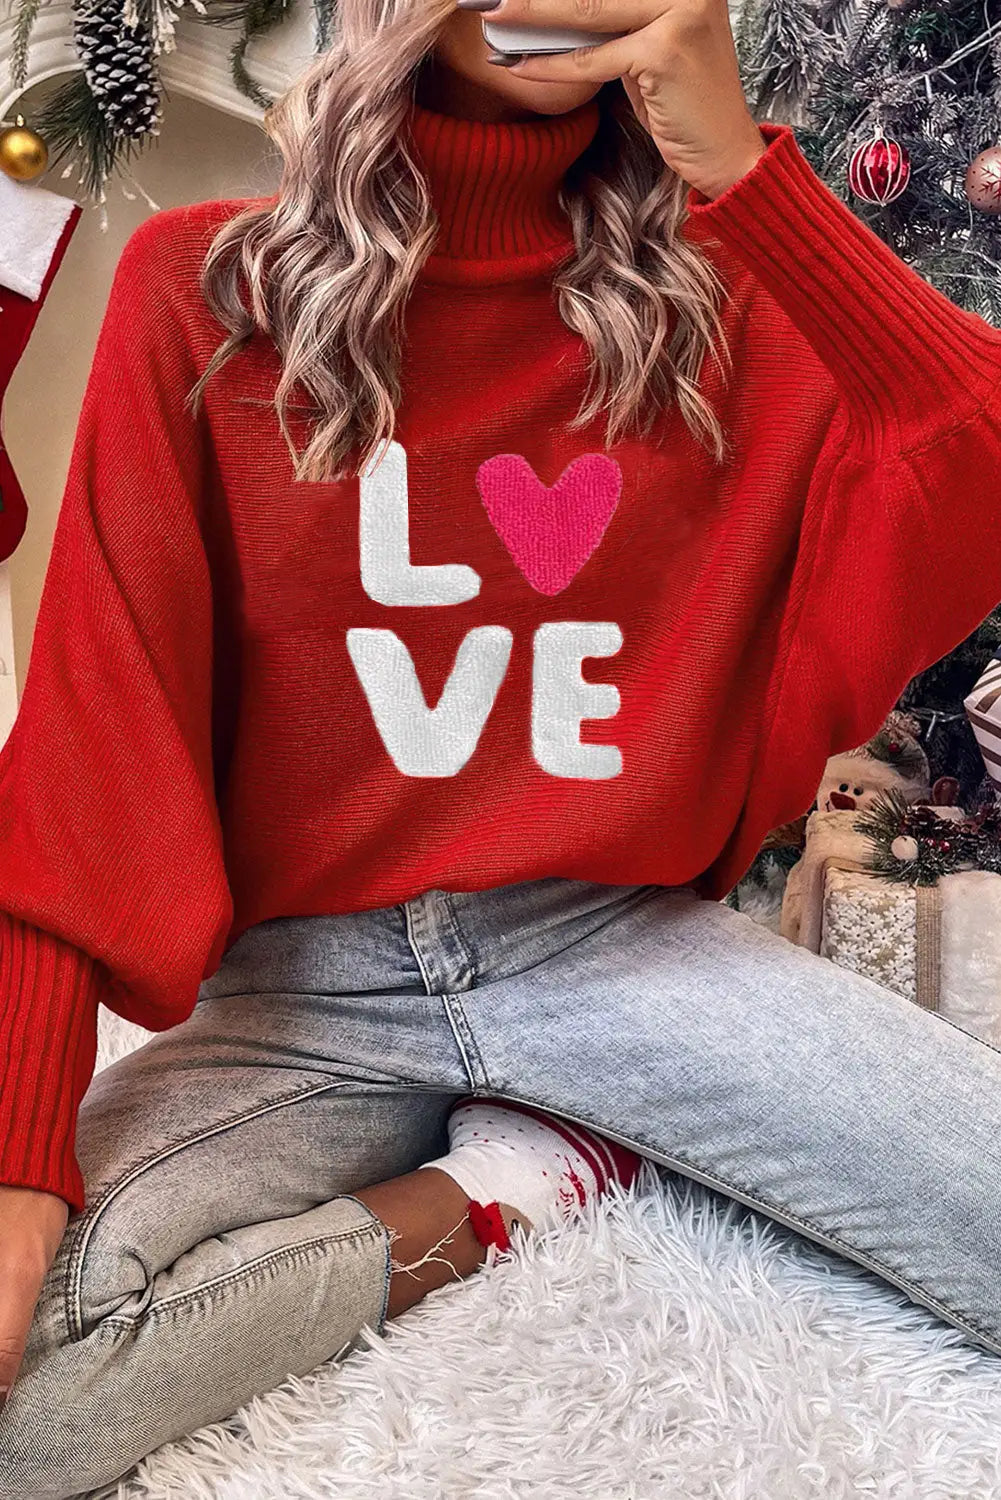 Racing red valentine love letter embroidered high neck sweater - s / 100% acrylic - tops